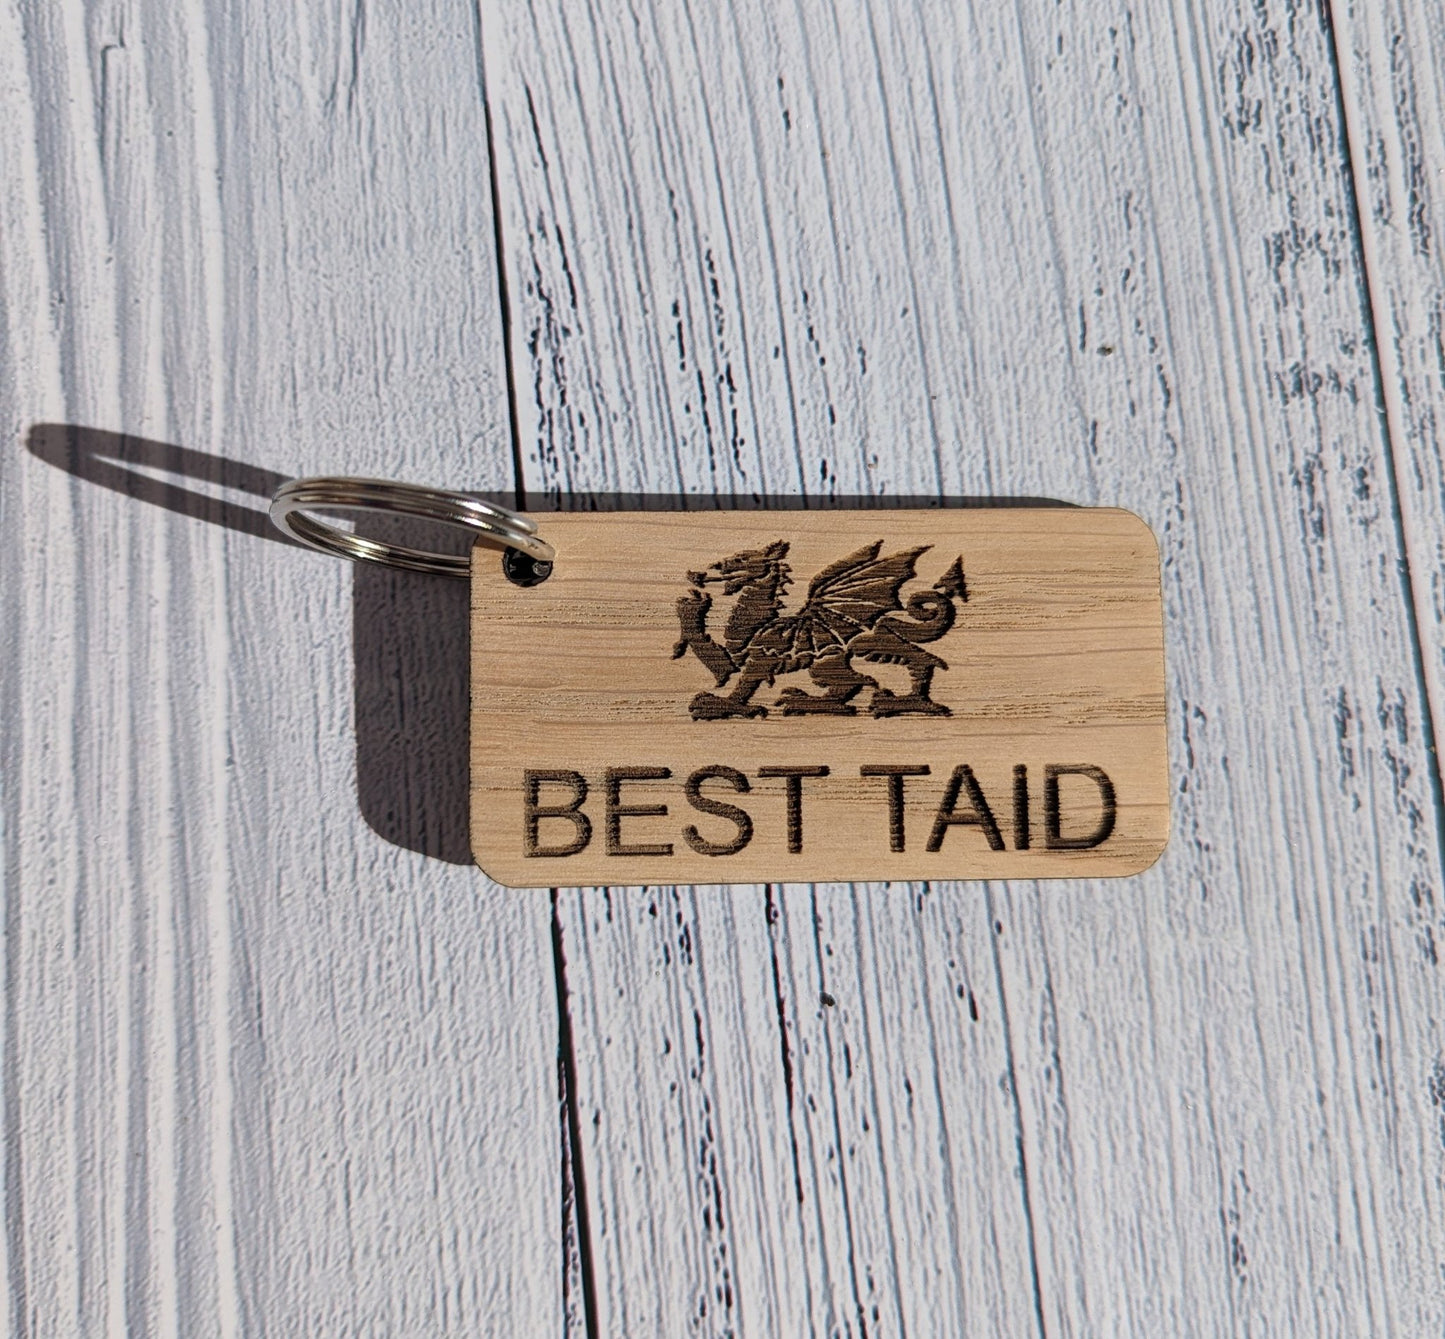 Personalised Patriotic Welsh Keyrings with Welsh Dragon and Phrases - CherryGroveCraft